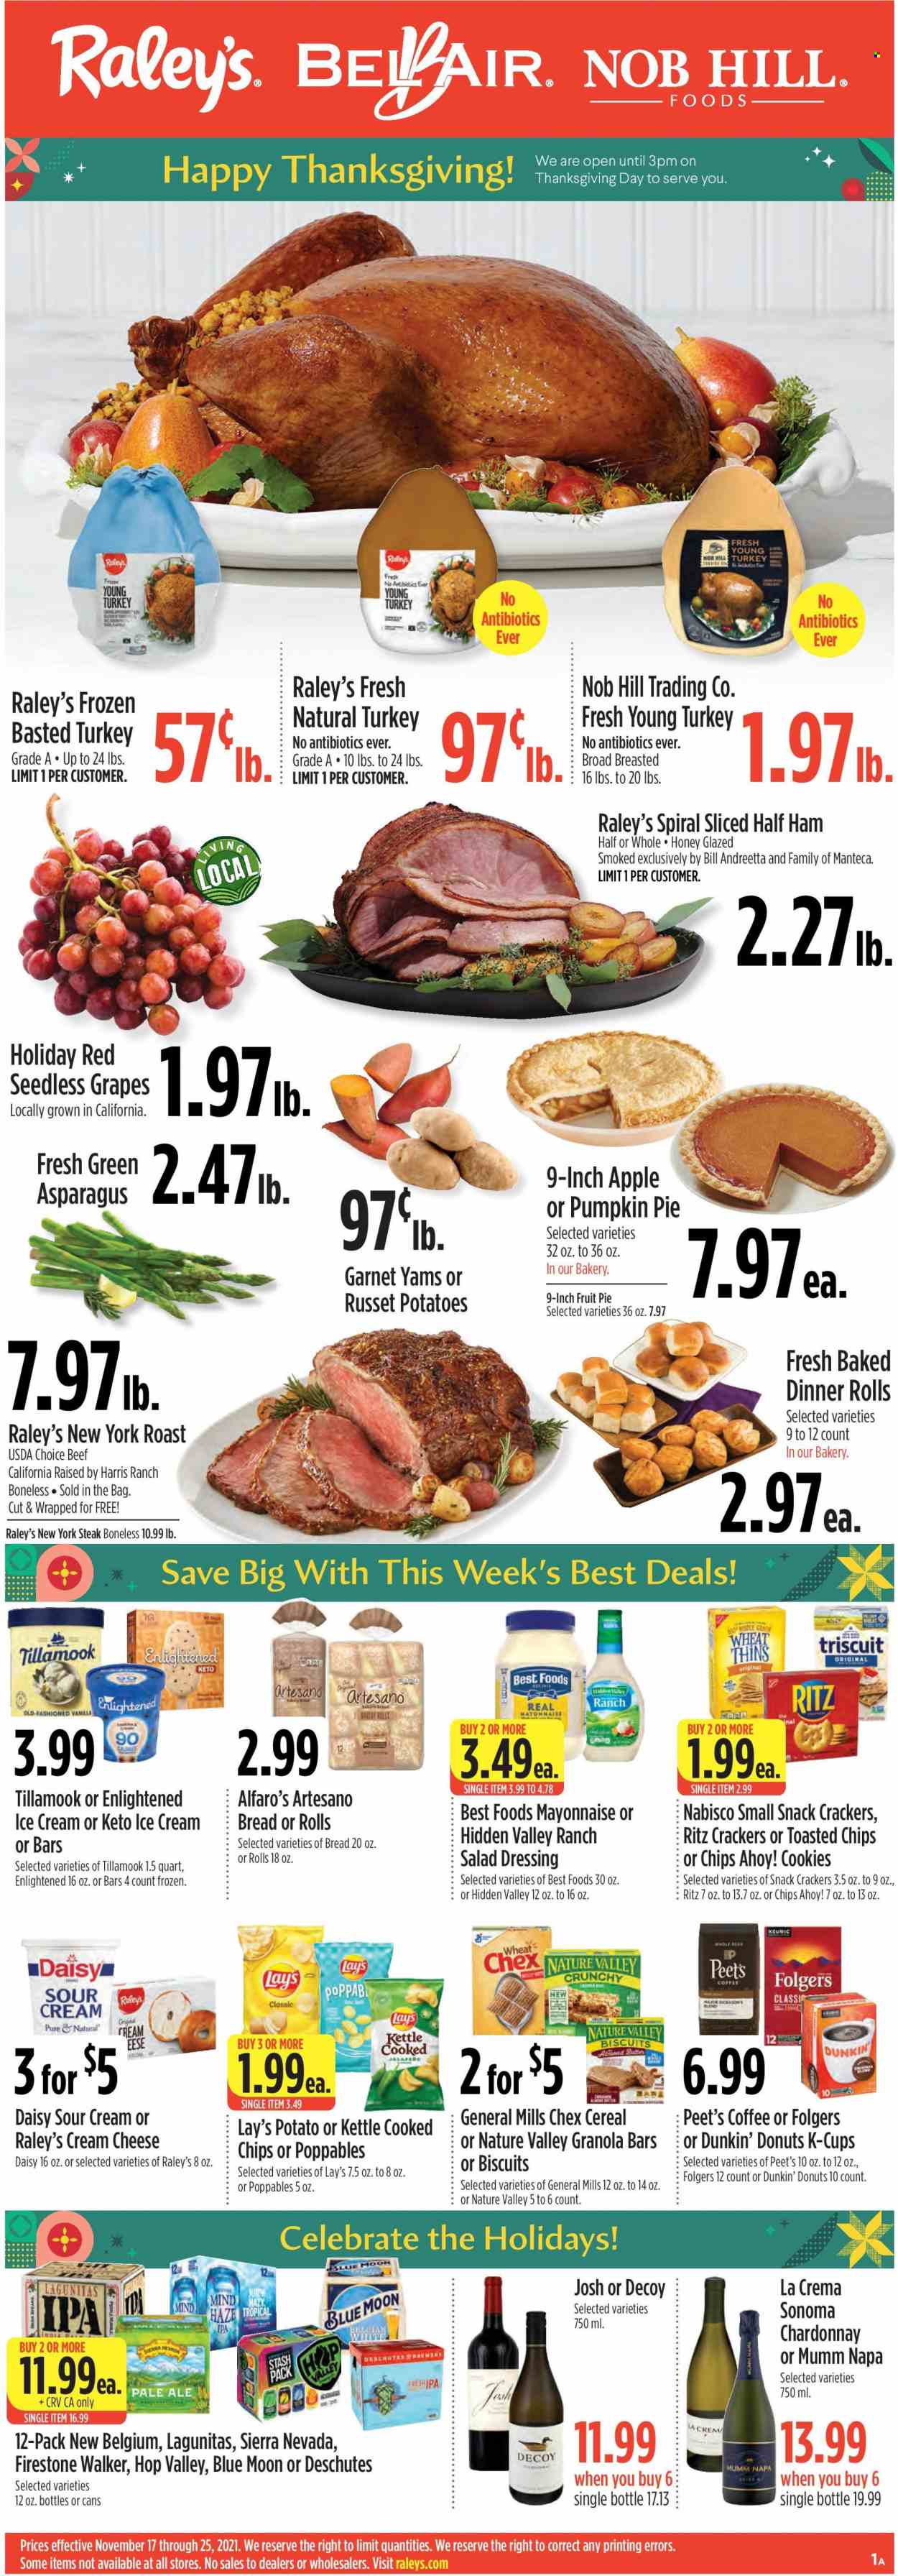 thumbnail - Raley's Flyer - 11/17/2021 - 11/25/2021 - Sales products - seedless grapes, bread, pie, dinner rolls, donut, Dunkin' Donuts, asparagus, russet potatoes, potatoes, pumpkin, grapes, half ham, ham, cream cheese, butter, sour cream, mayonnaise, ice cream, Enlightened lce Cream, cookies, snack, crackers, biscuit, Chips Ahoy!, RITZ, Lay’s, Thins, Harris, cereals, granola bar, Nature Valley, salad dressing, dressing, coffee, Folgers, coffee capsules, K-Cups, white wine, Chardonnay, wine, beer, IPA, Firestone Walker, steak, Blue Moon. Page 1.